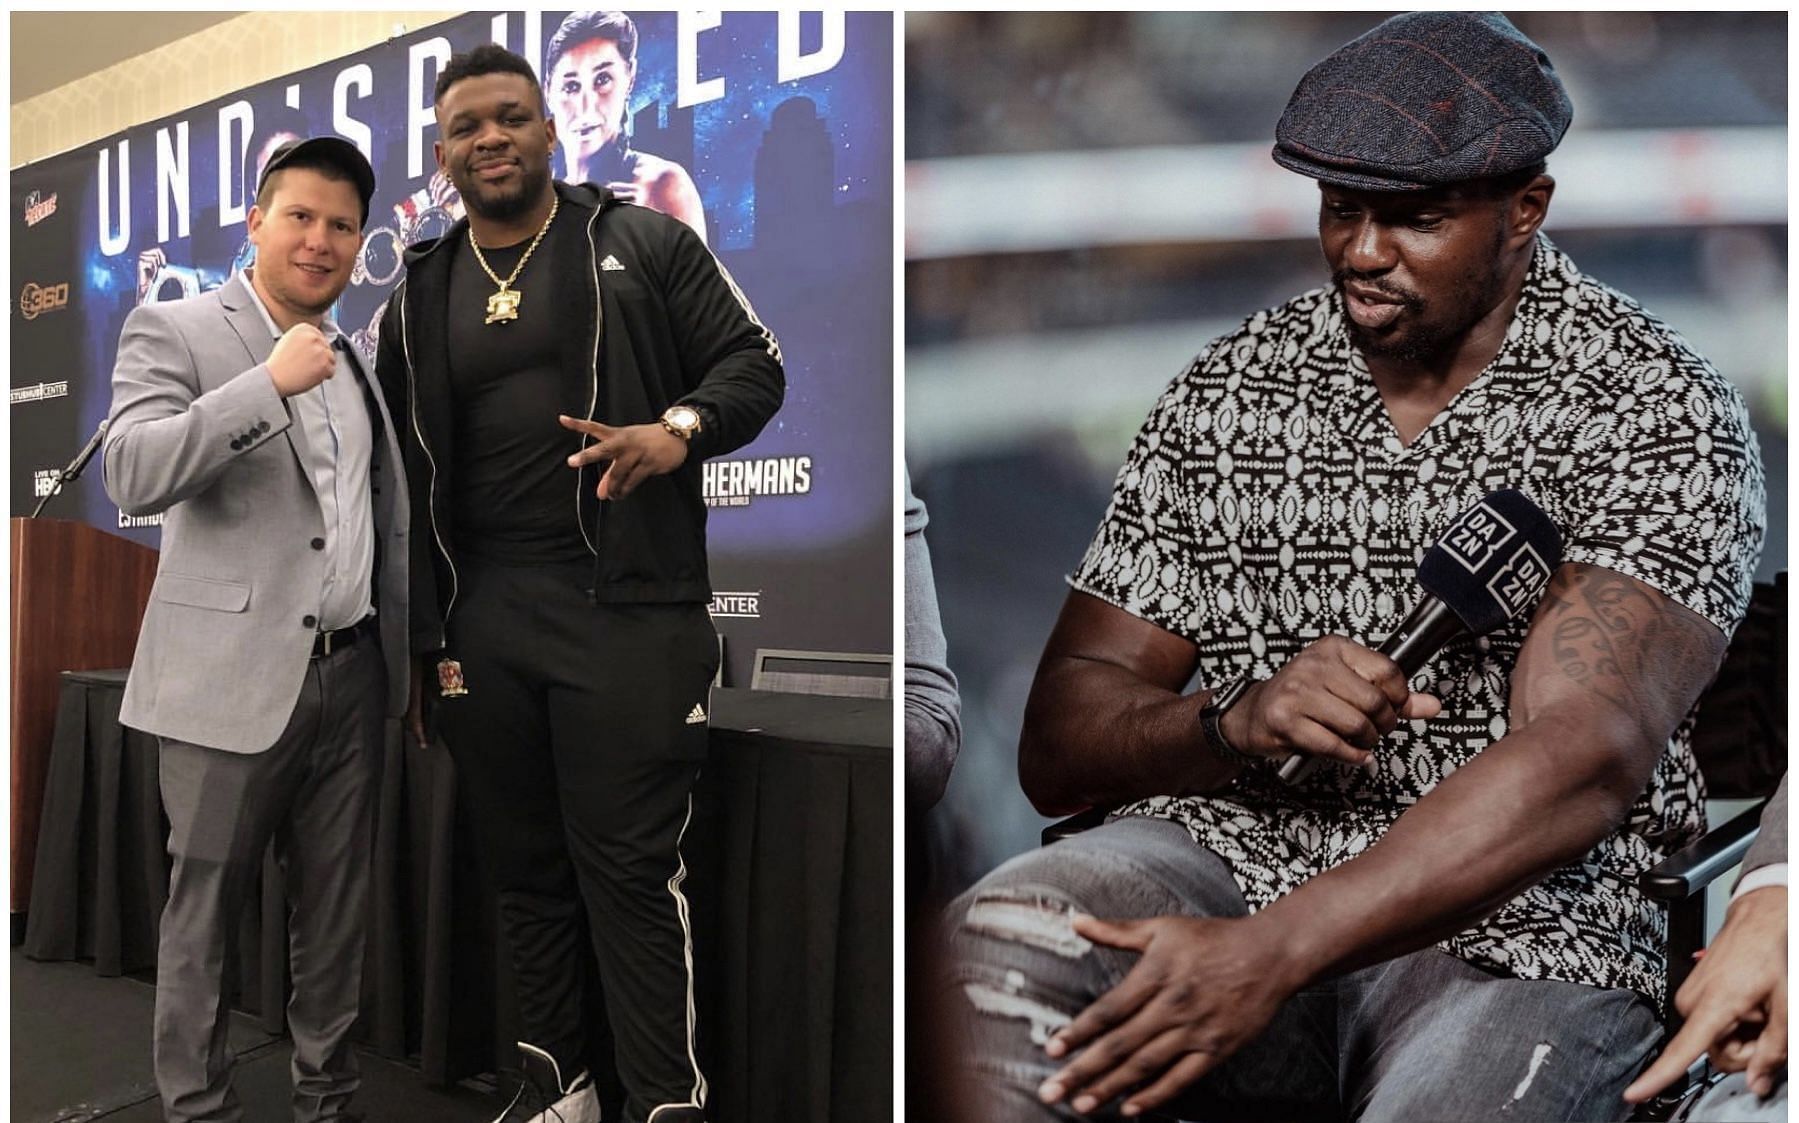 Dmitry Salita (left) and Jarrell Miller (middle), Dillian Whyte (right) - Images via @moremediahits, @dillianwhyte on Instagram